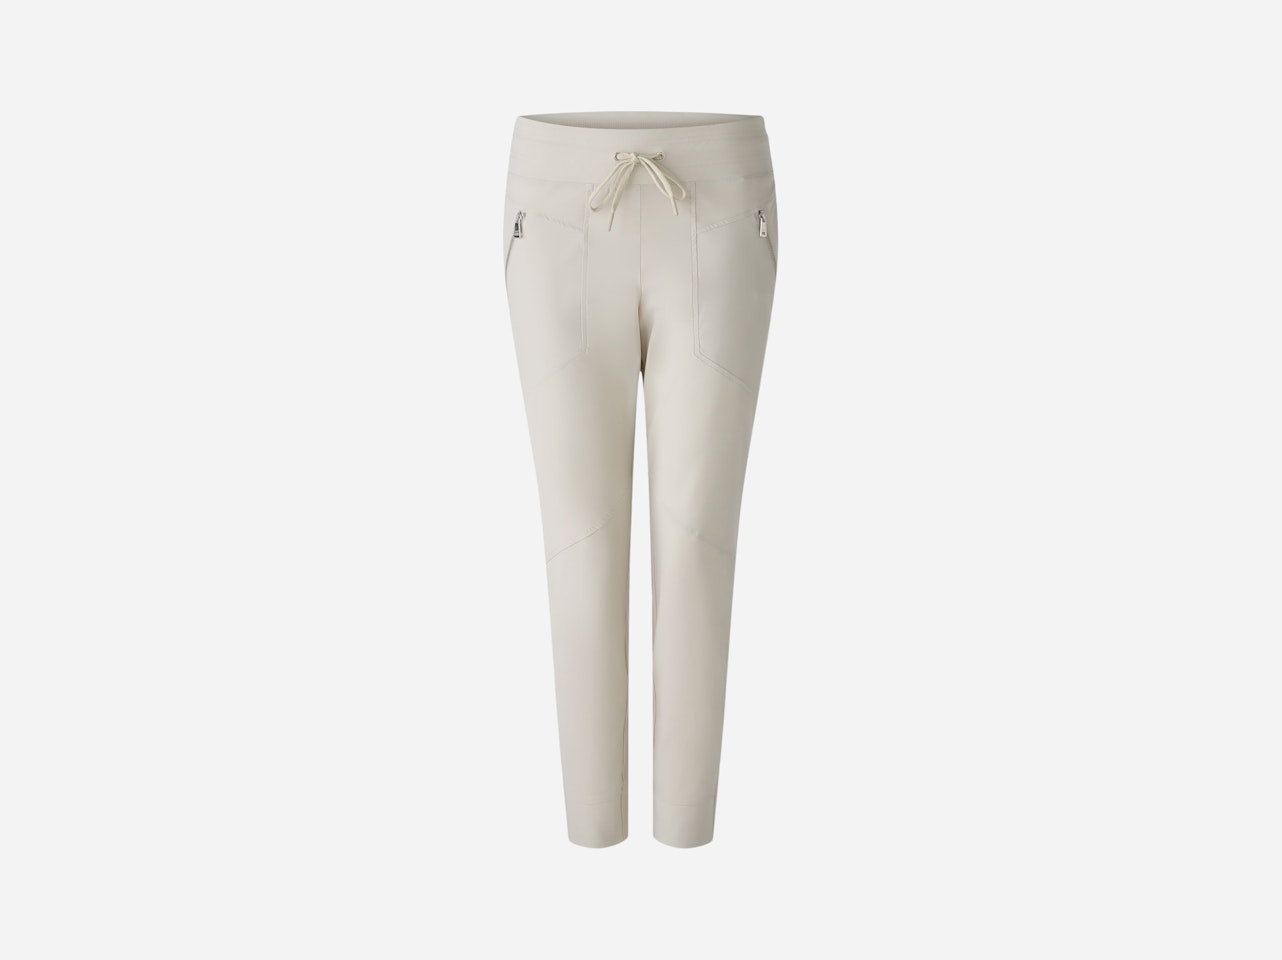 Bild 1 von Trousers with high elastane content in silver lining | Oui